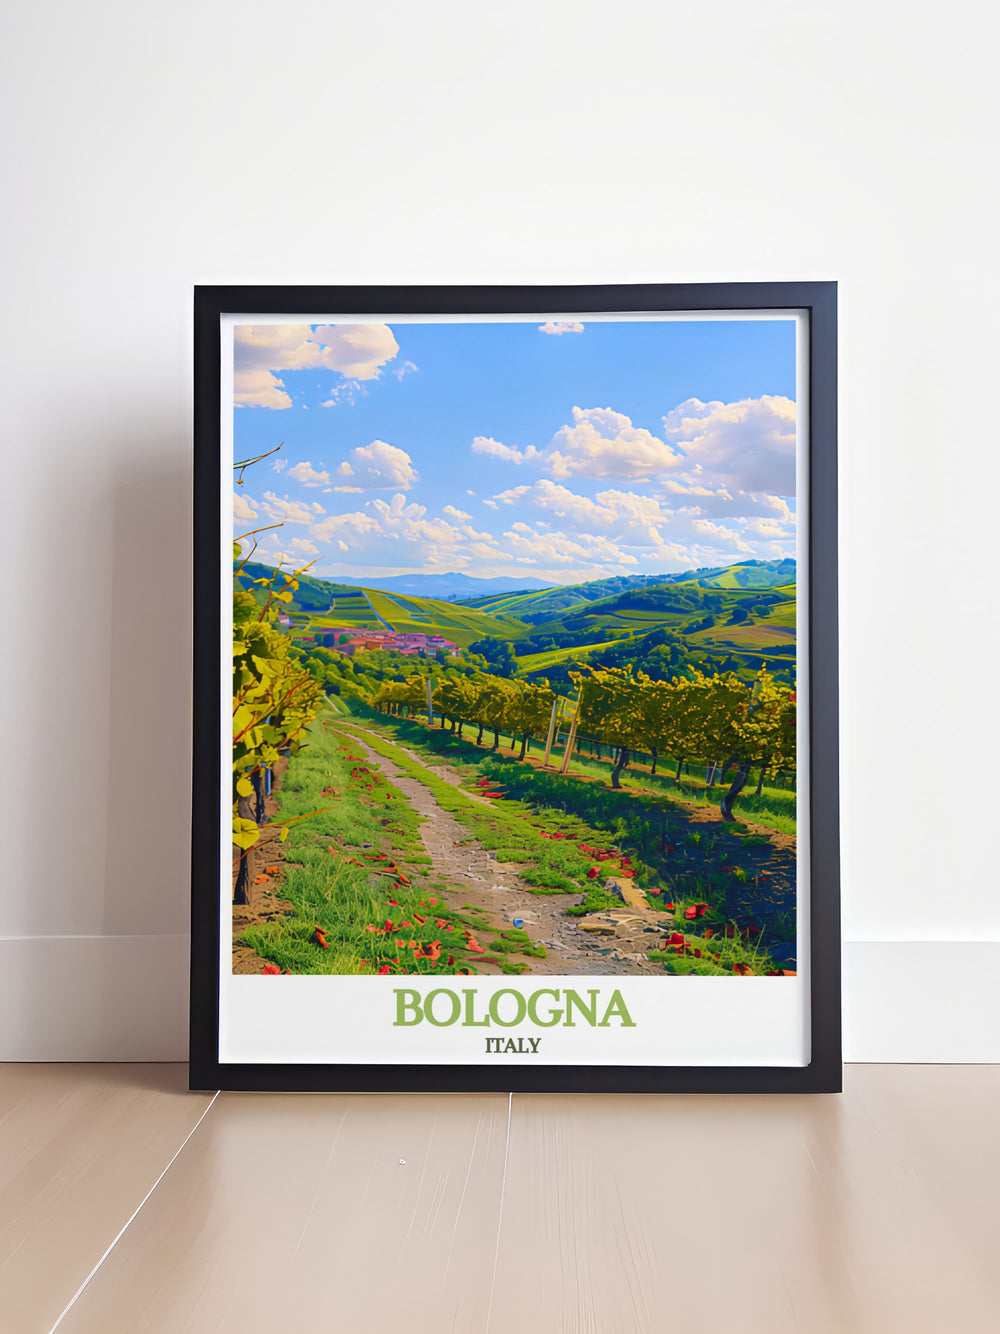 Stunning Bologna art print highlighting the medieval towers and lush vineyards of Colli Bolognesi, ideal for history buffs and nature enthusiasts.